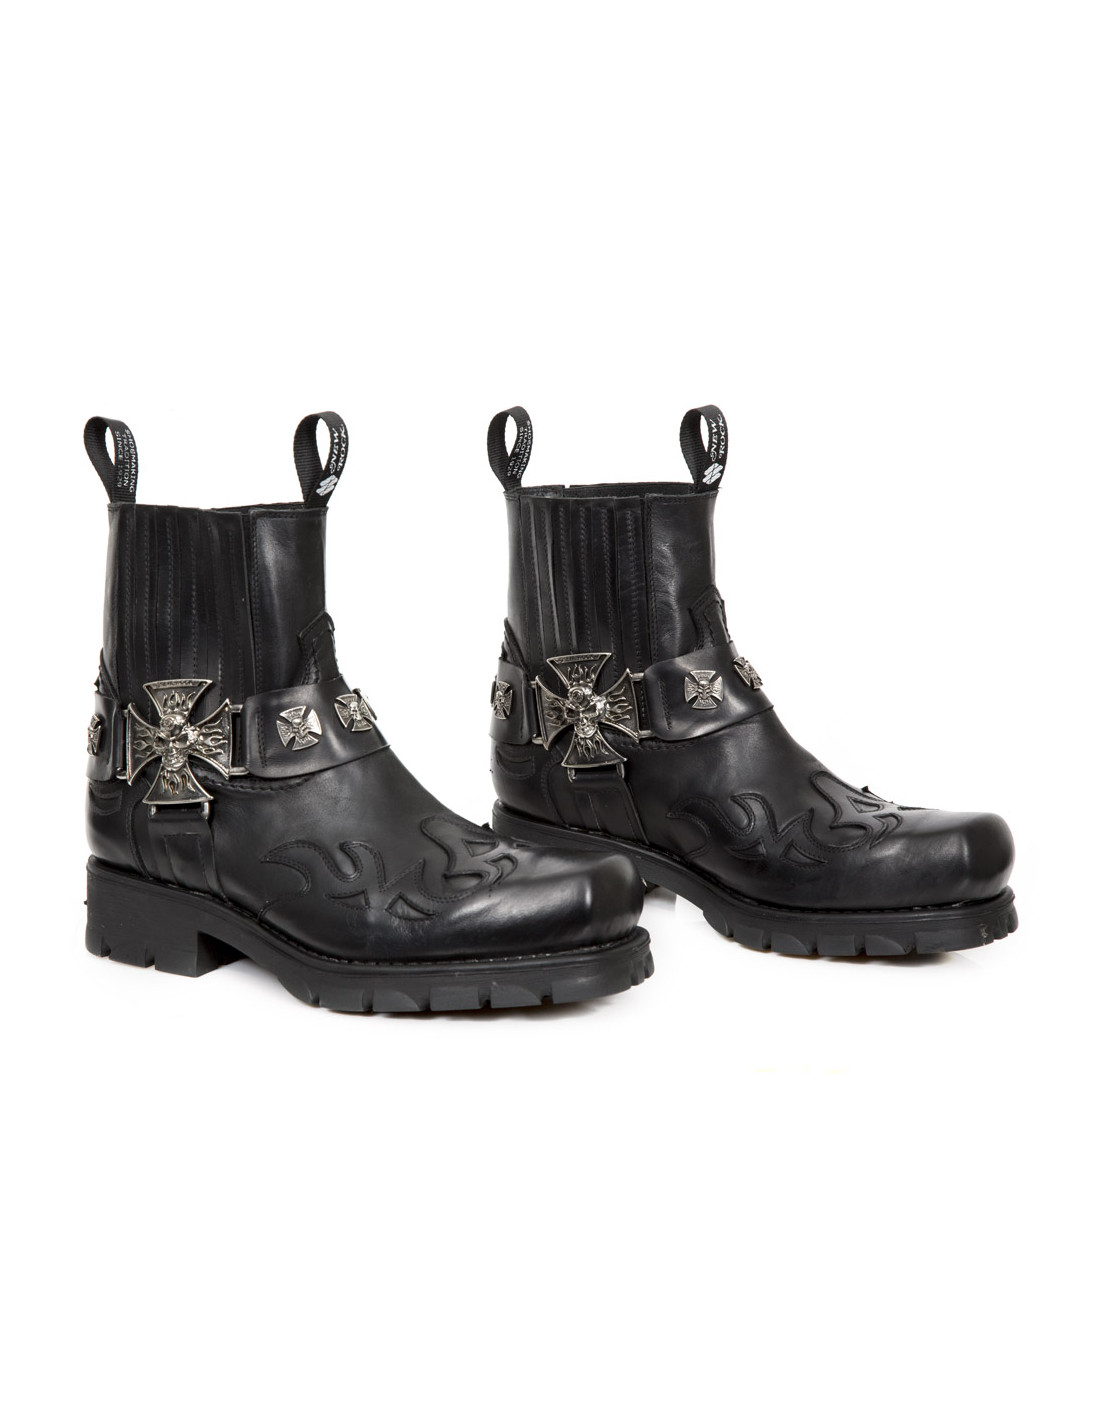 ANKLE BOOT MOTORCYCLE M-7647-C1